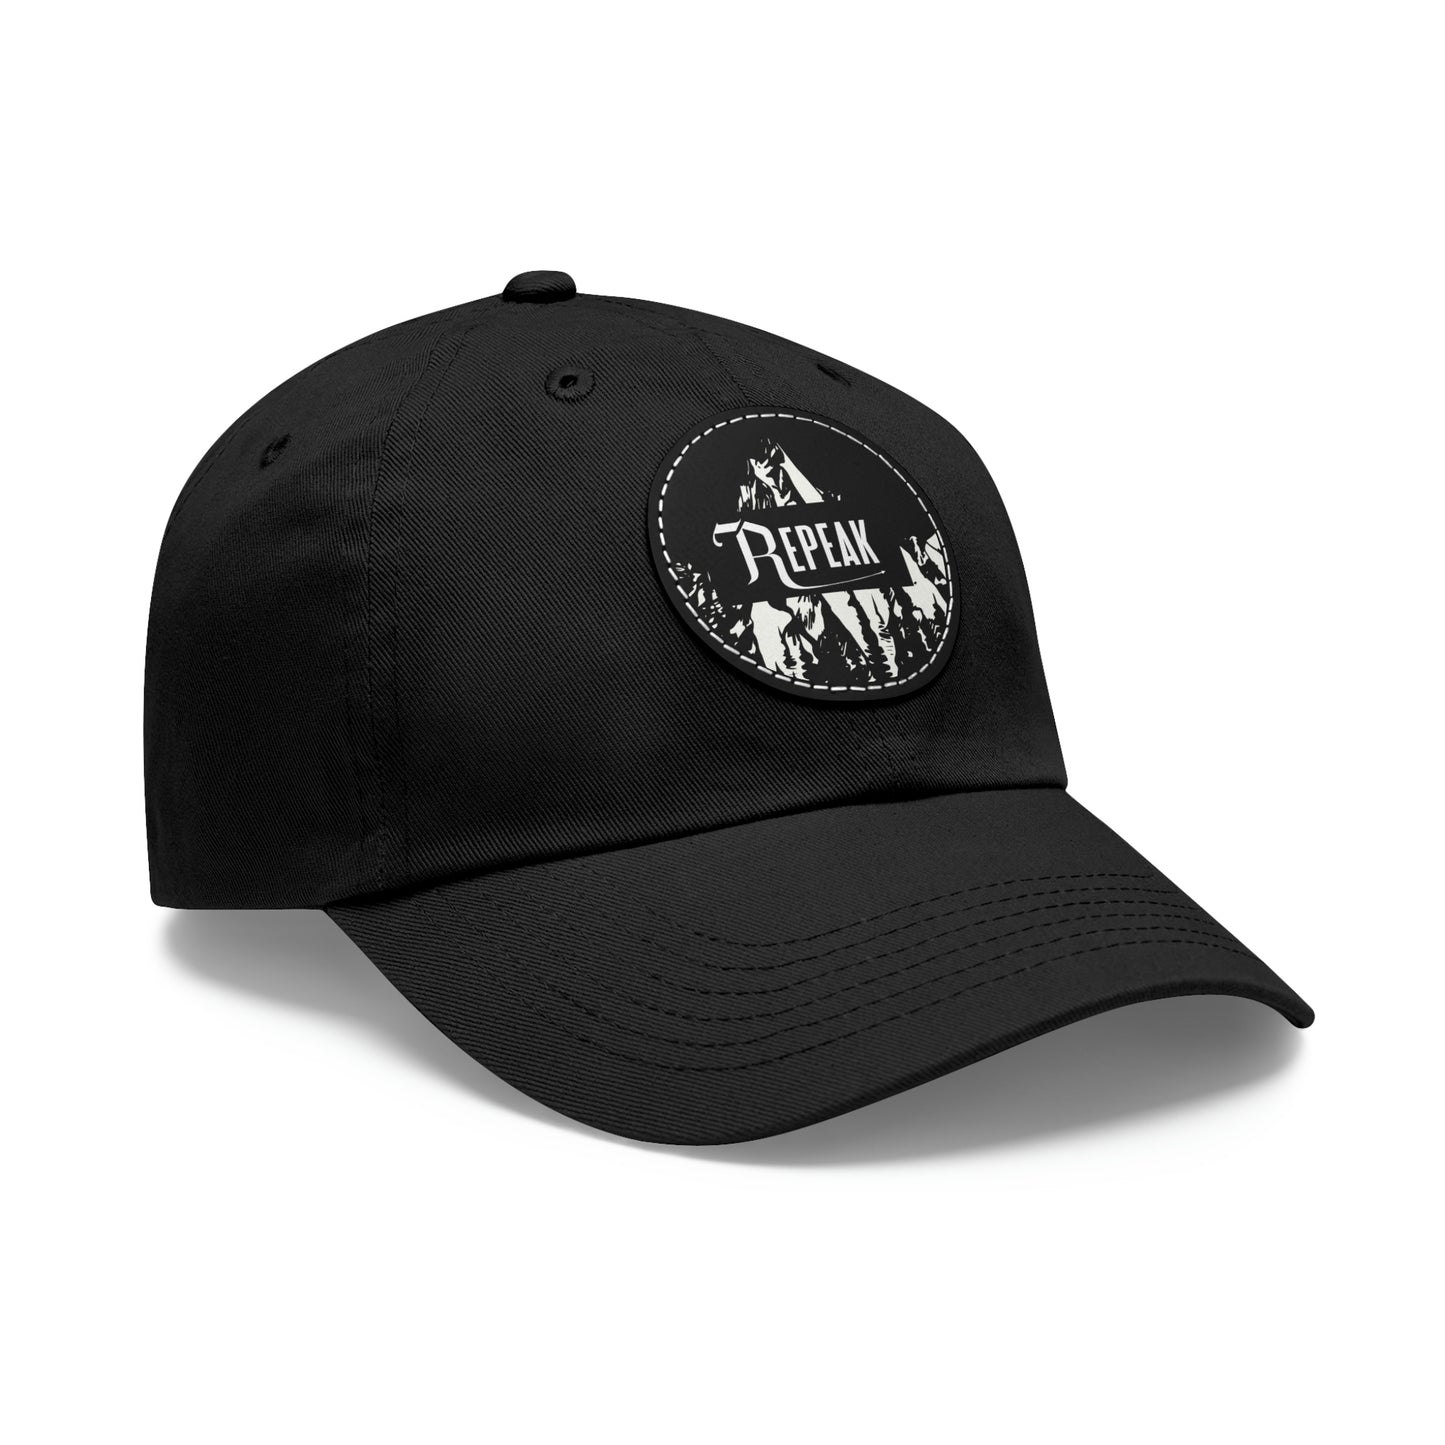 repeak energy dad hat, white and black, side angle